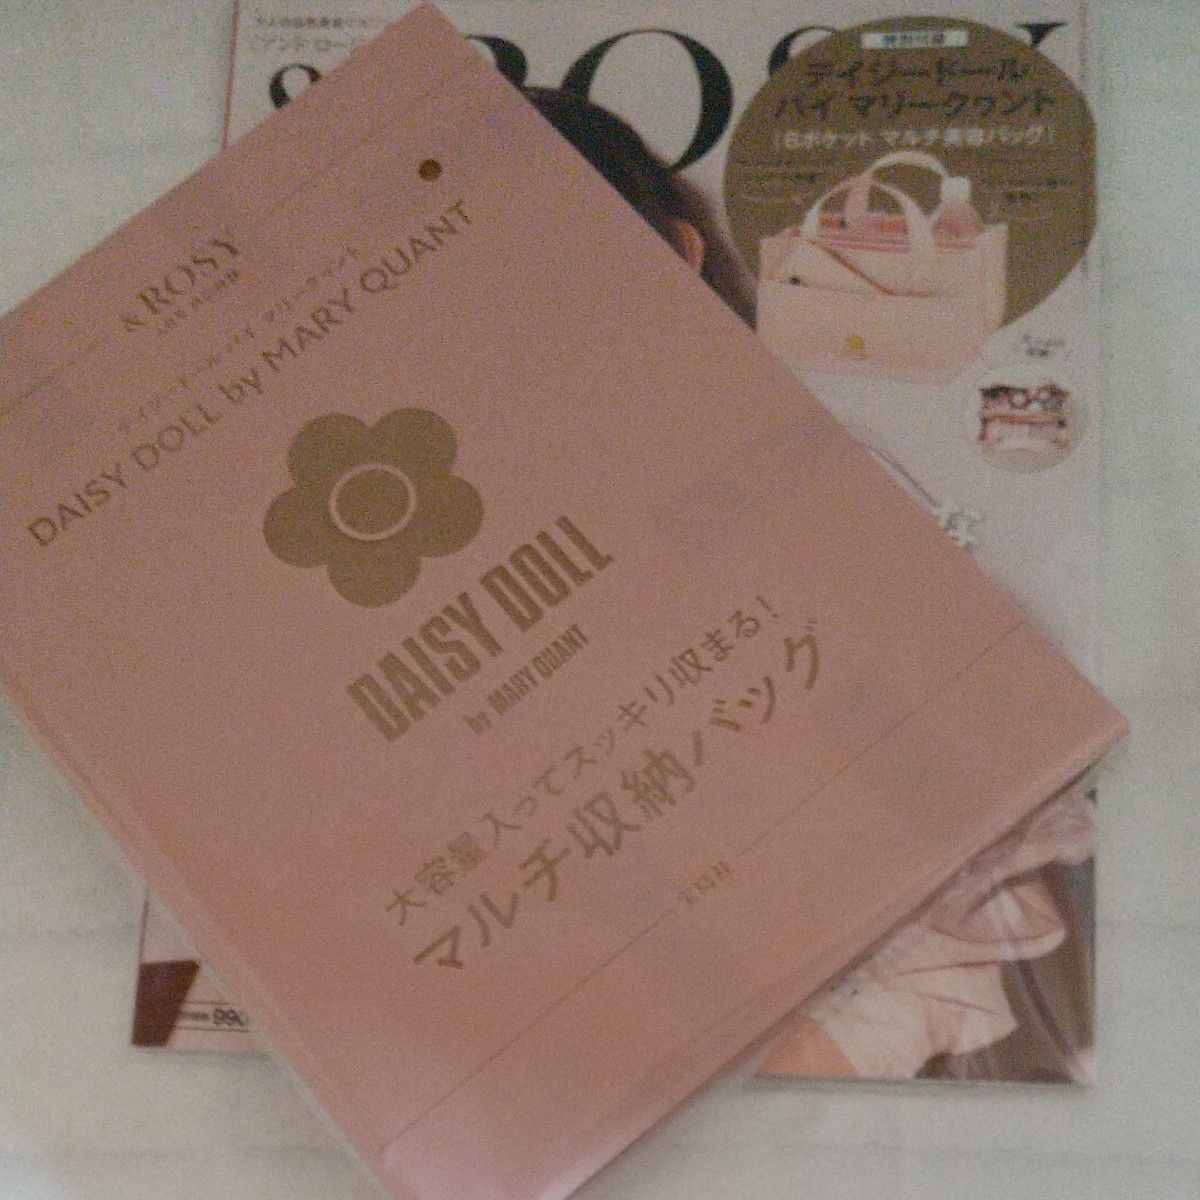  DAISY DOLL by MARY QUANT マルチ収納バッグ、雑誌